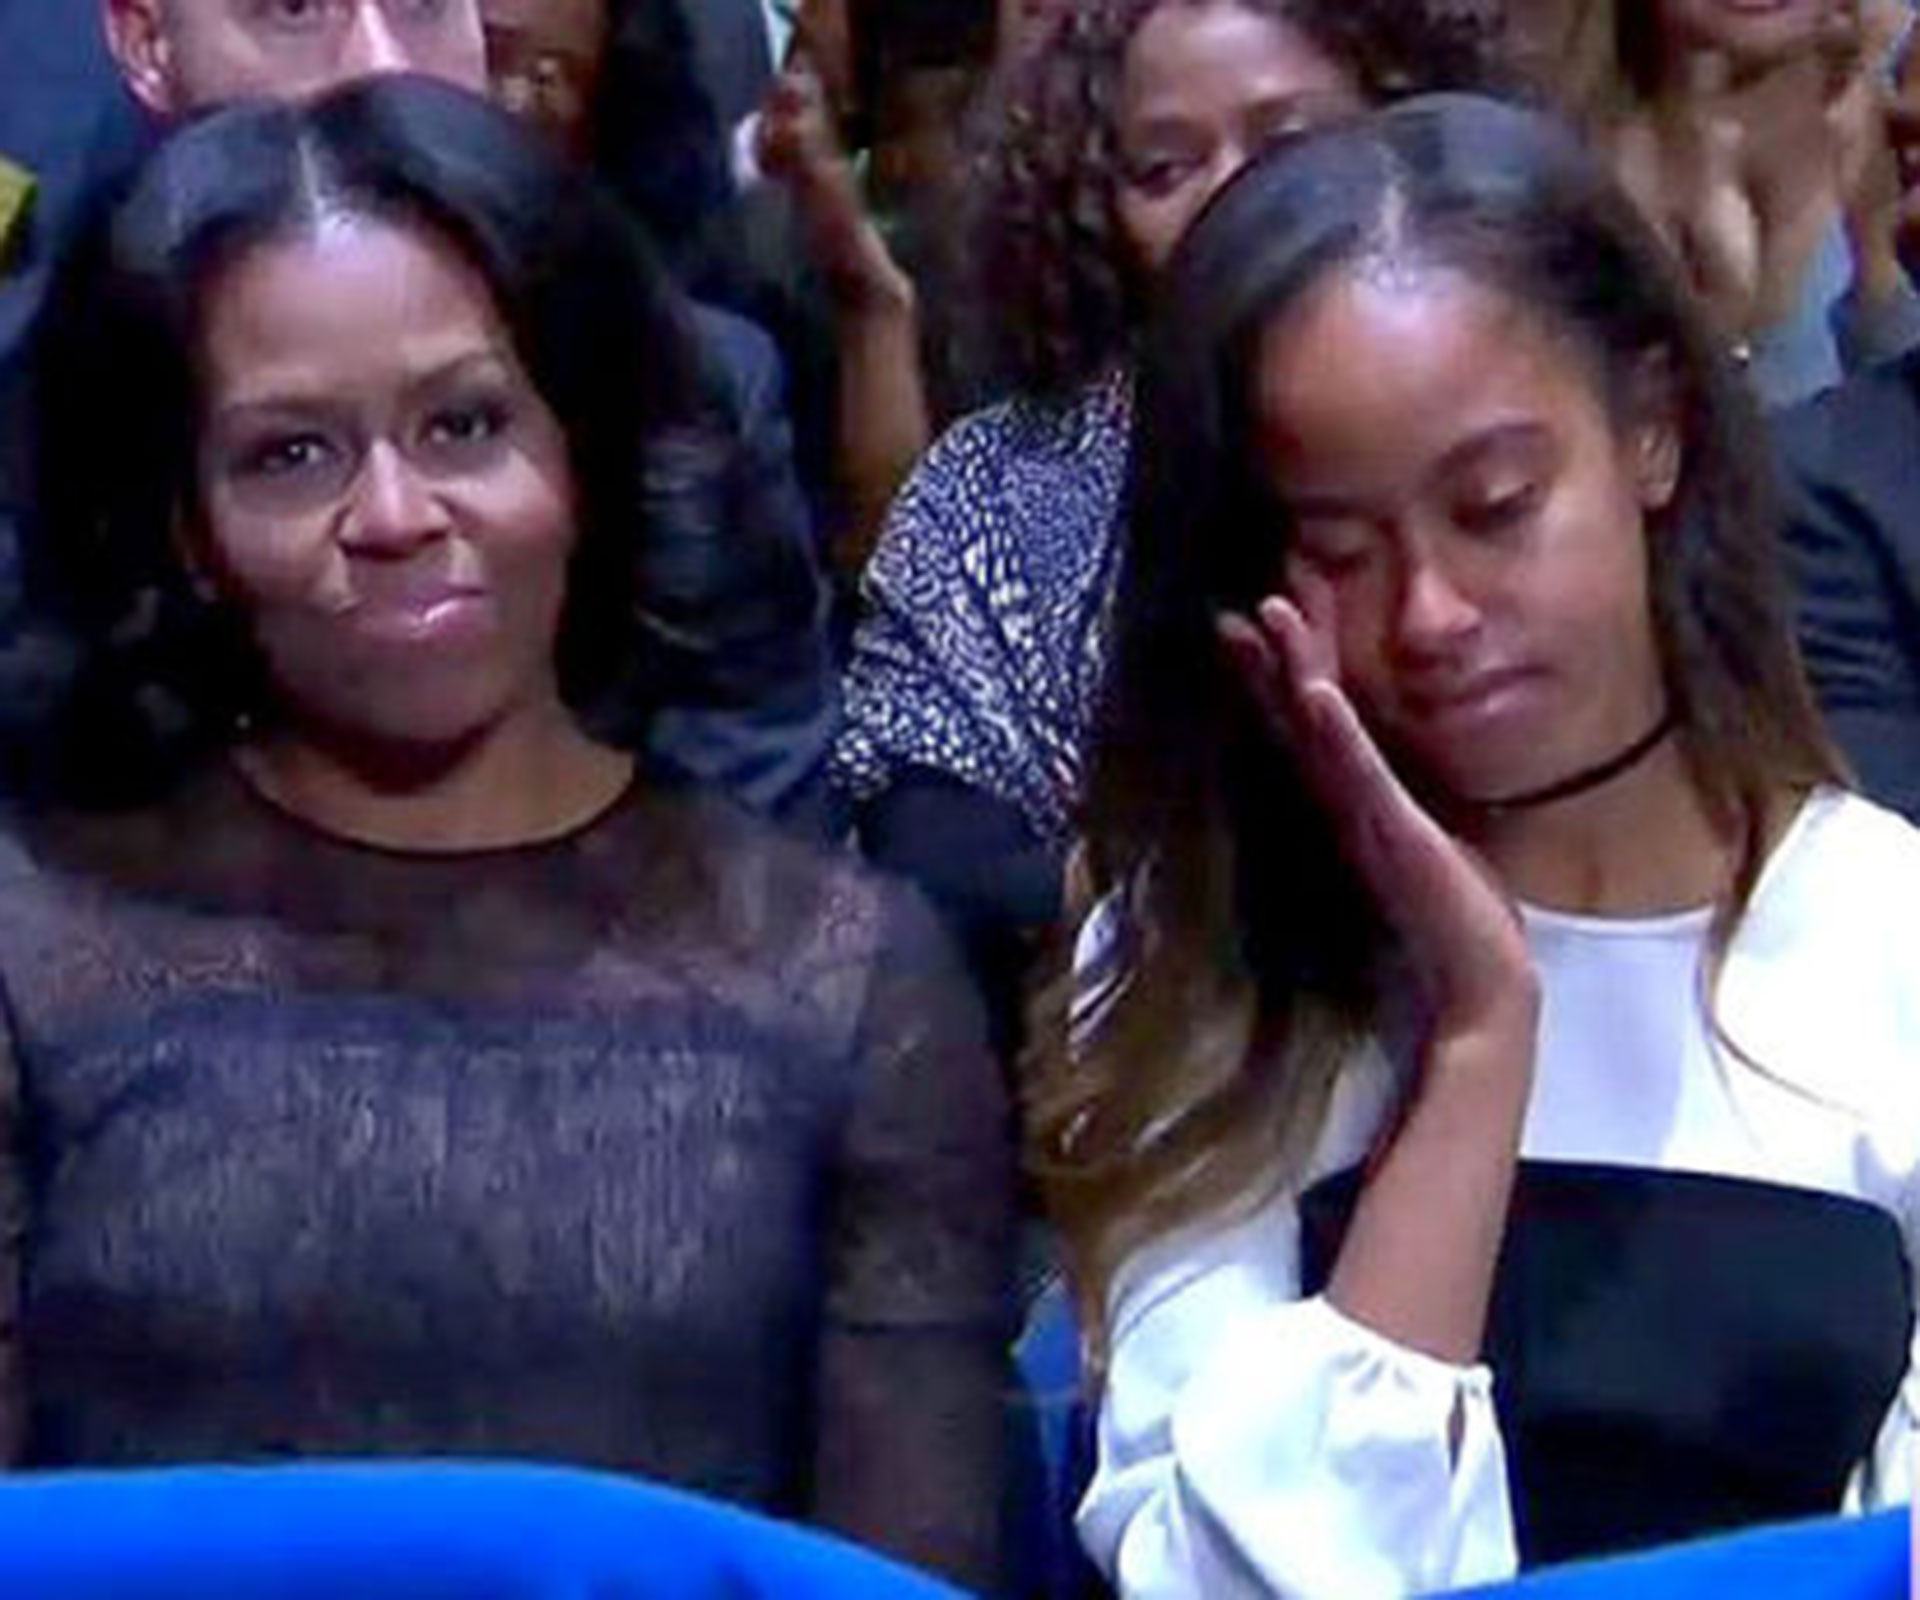 Barack Obama’s heartfelt tribute to Michelle during his farewell speech will make you cry